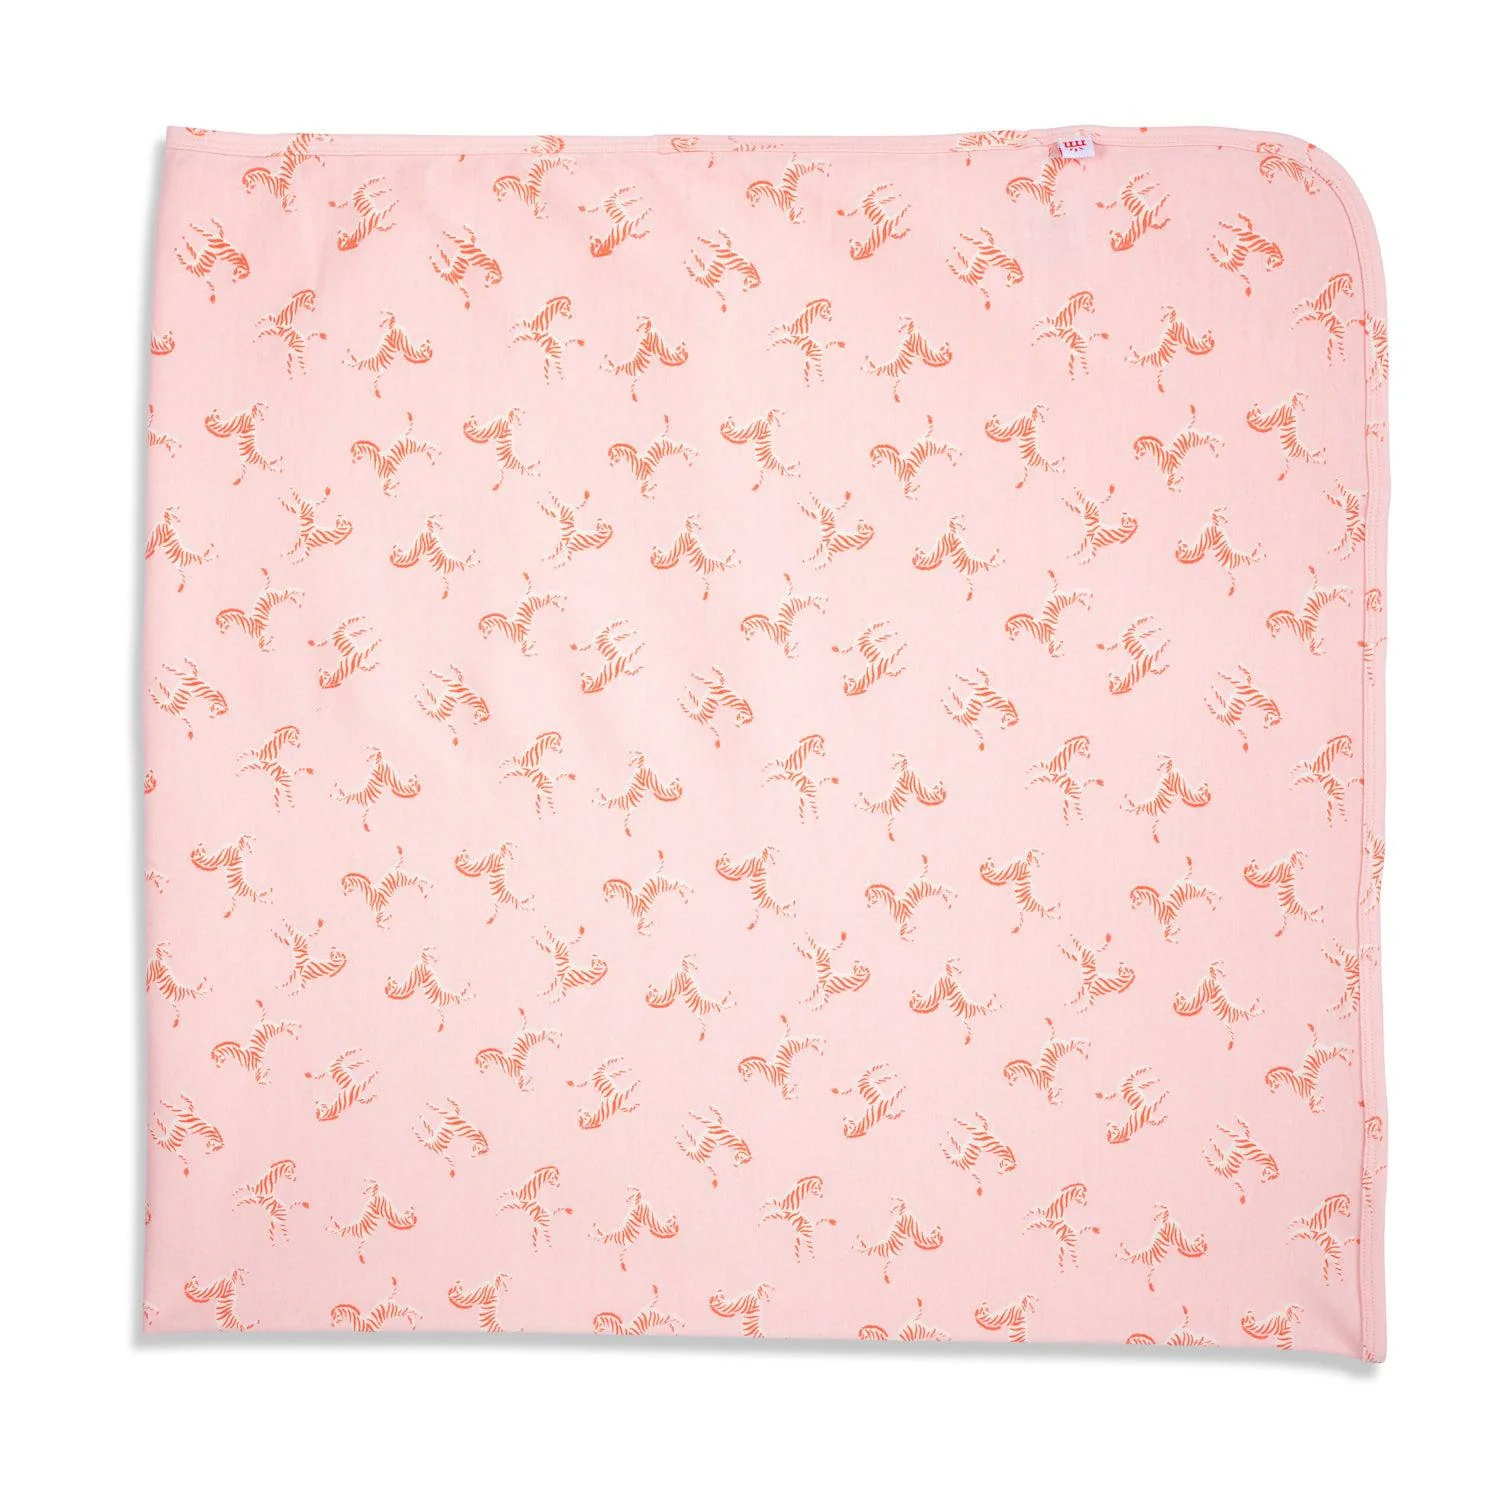 Game For Play Pink Blanket